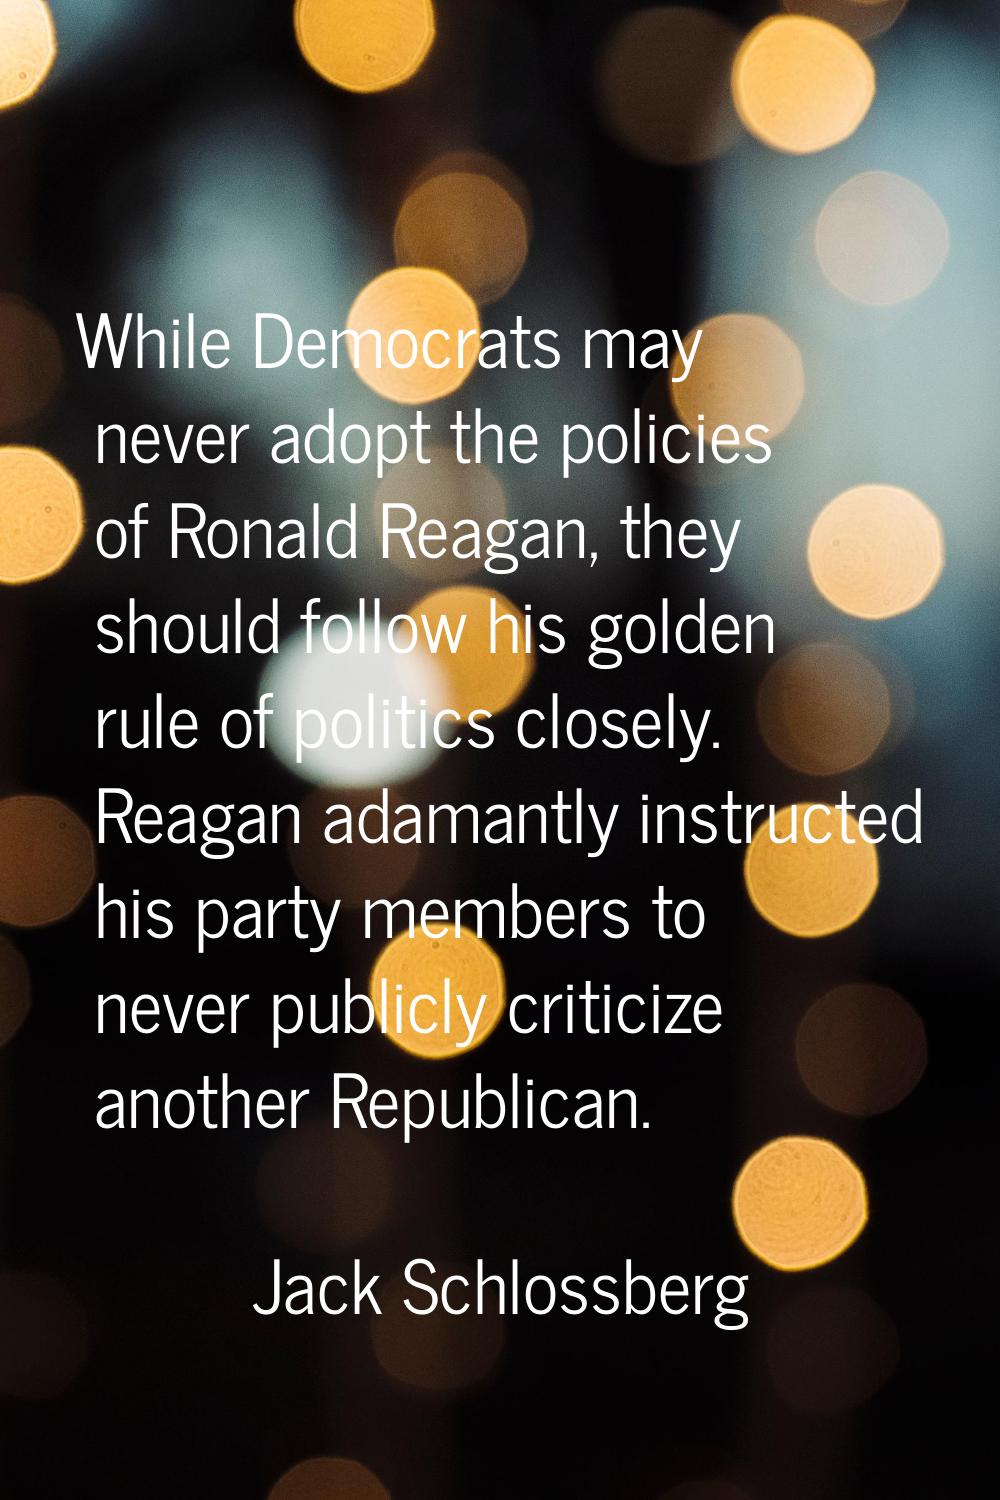 While Democrats may never adopt the policies of Ronald Reagan, they should follow his golden rule o